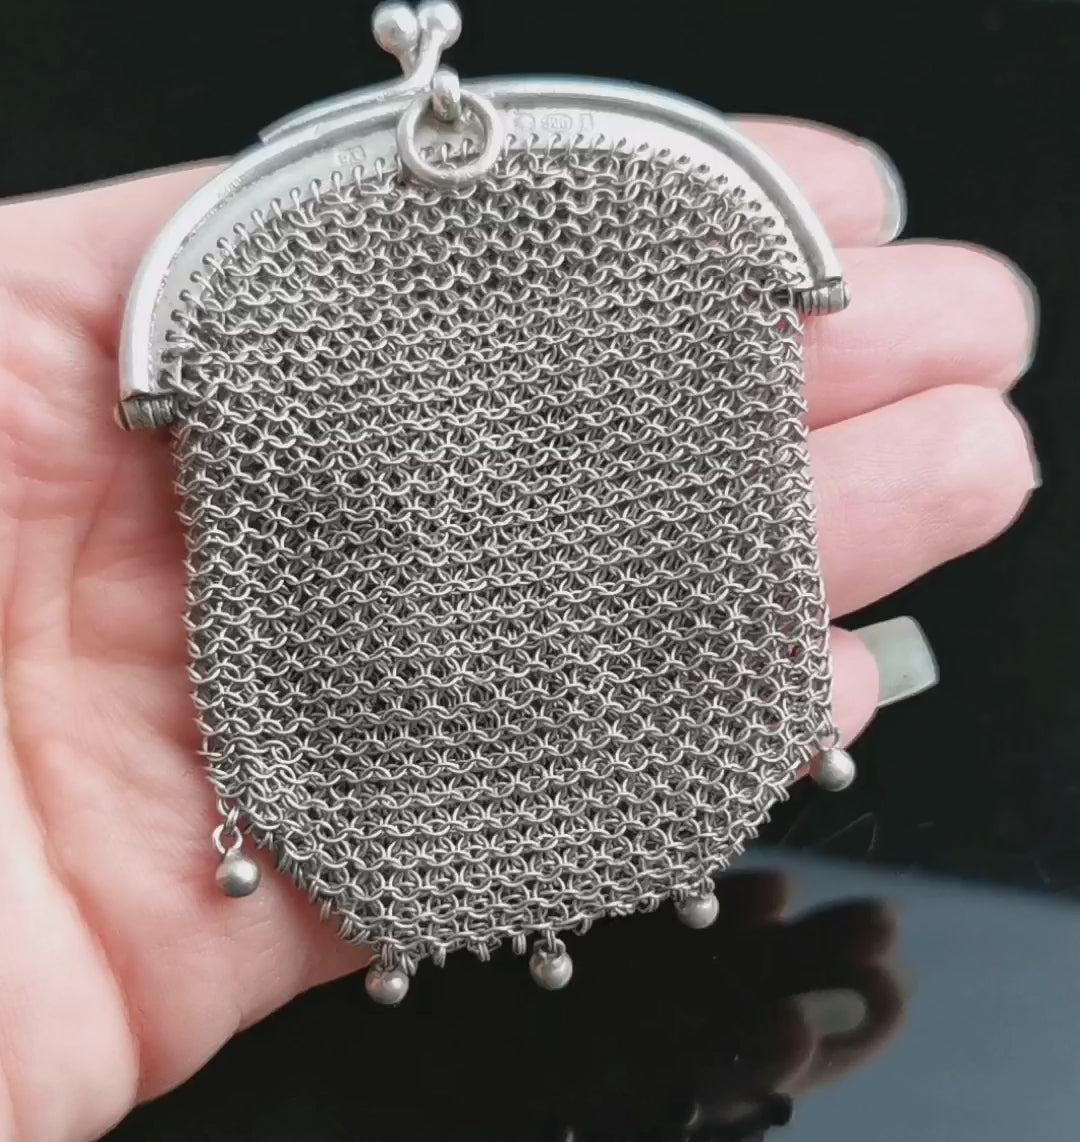 Buy Antique Victorian Silver Mesh Purse Wrist Bag Coin Purse Online in  India - Etsy